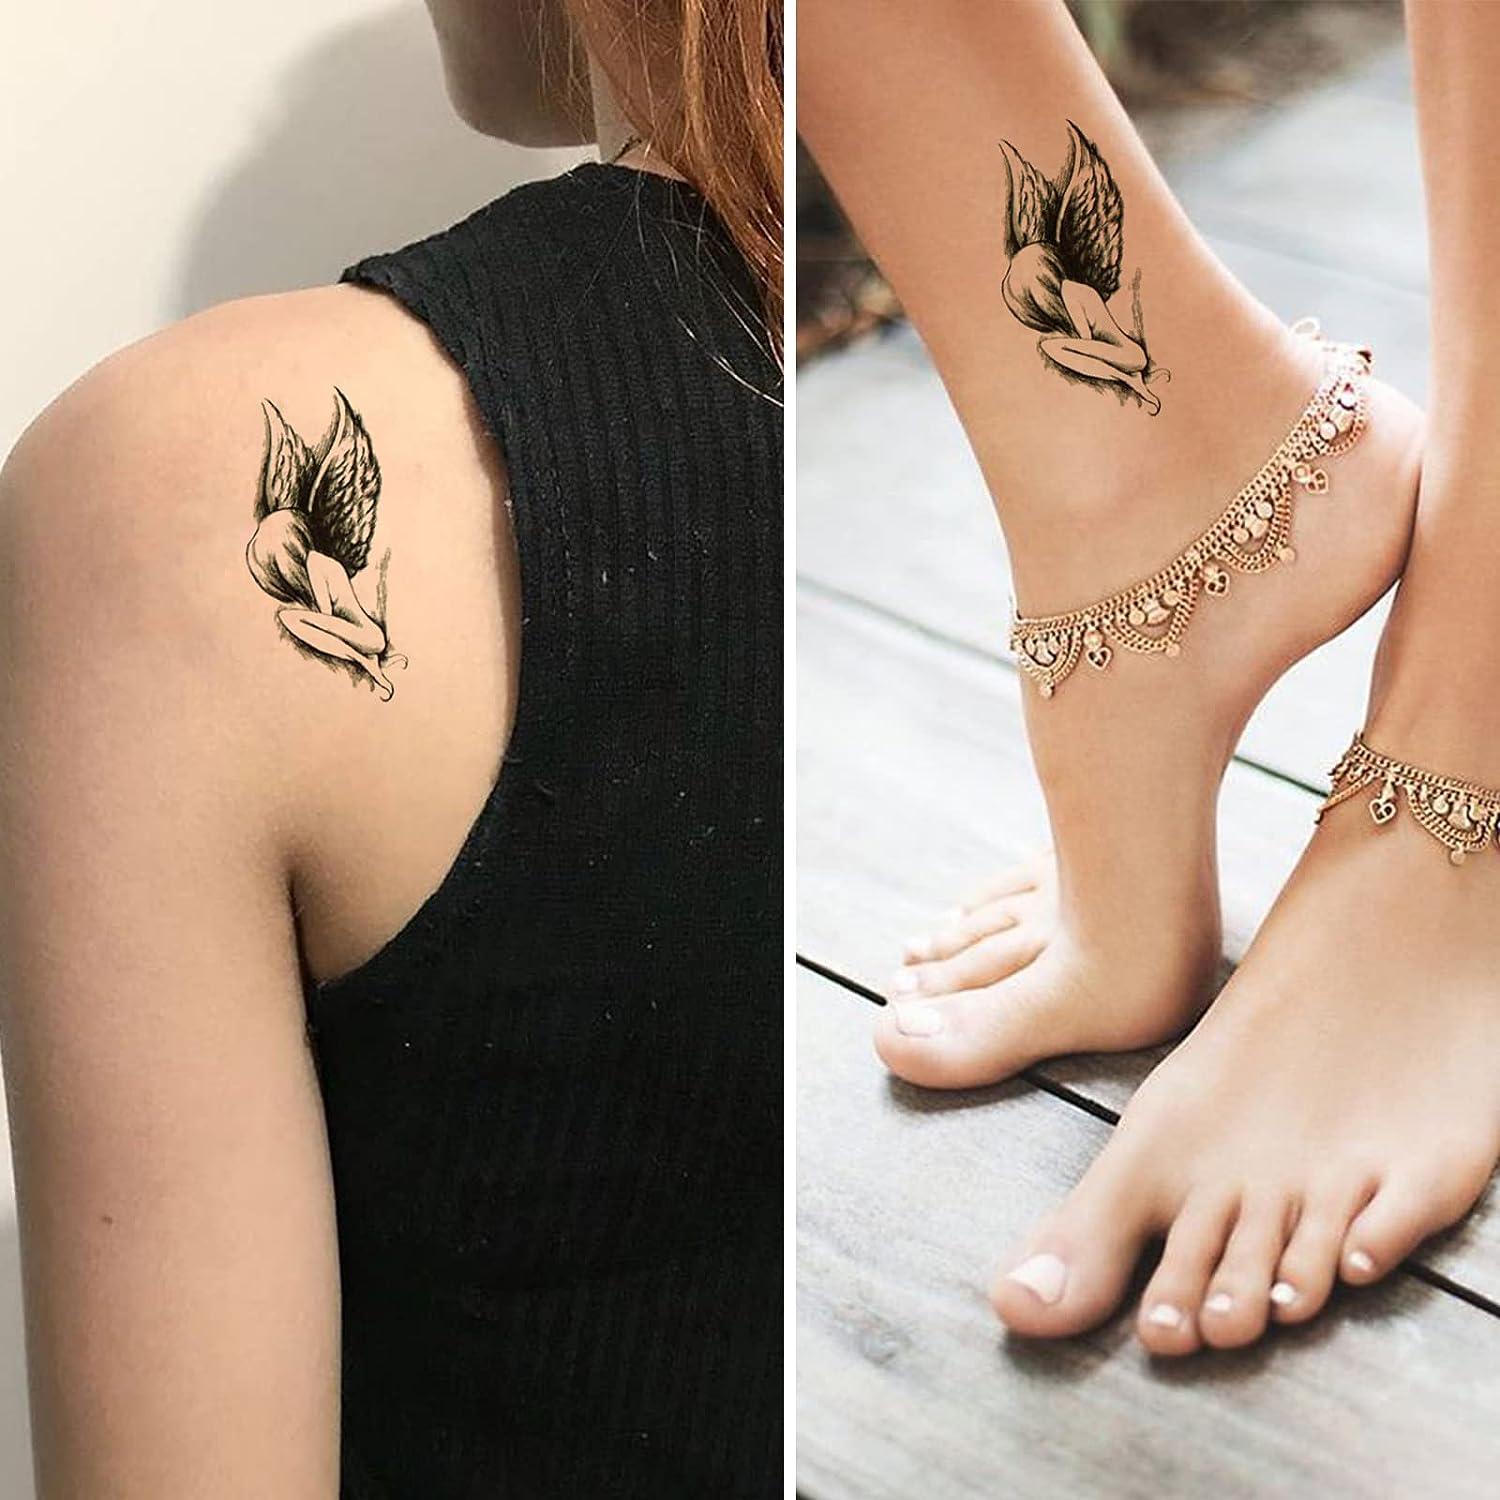 tattoo designs for girls on ankle angel